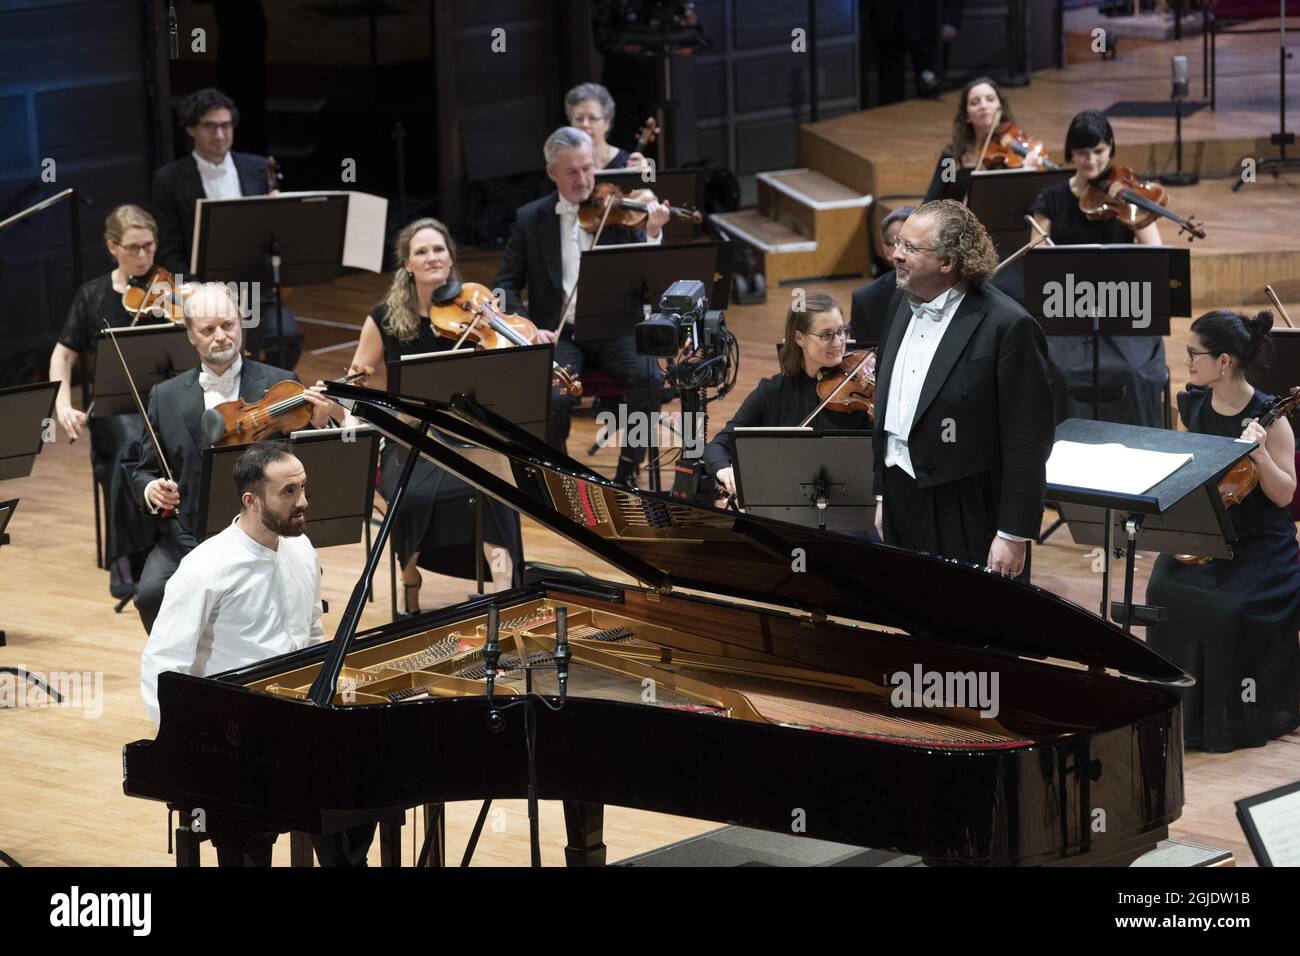 Russian-German pianist Igor Levit (L) and French conductor Stéphane Denève toghether with the Royal Stockholm Philharmonic Orchestra perform Beethoven's Piano Concerto No. 5 (Emperor Concerto) during the Nobel Prize Concert 2020 at the Stockholm Concert Hall, in Stockholm, Sweden, on Dec. 08, 2020. Photo: Fredrik Sandberg / TT / code 10080 *** SWEDEN OUT ***  Stock Photo